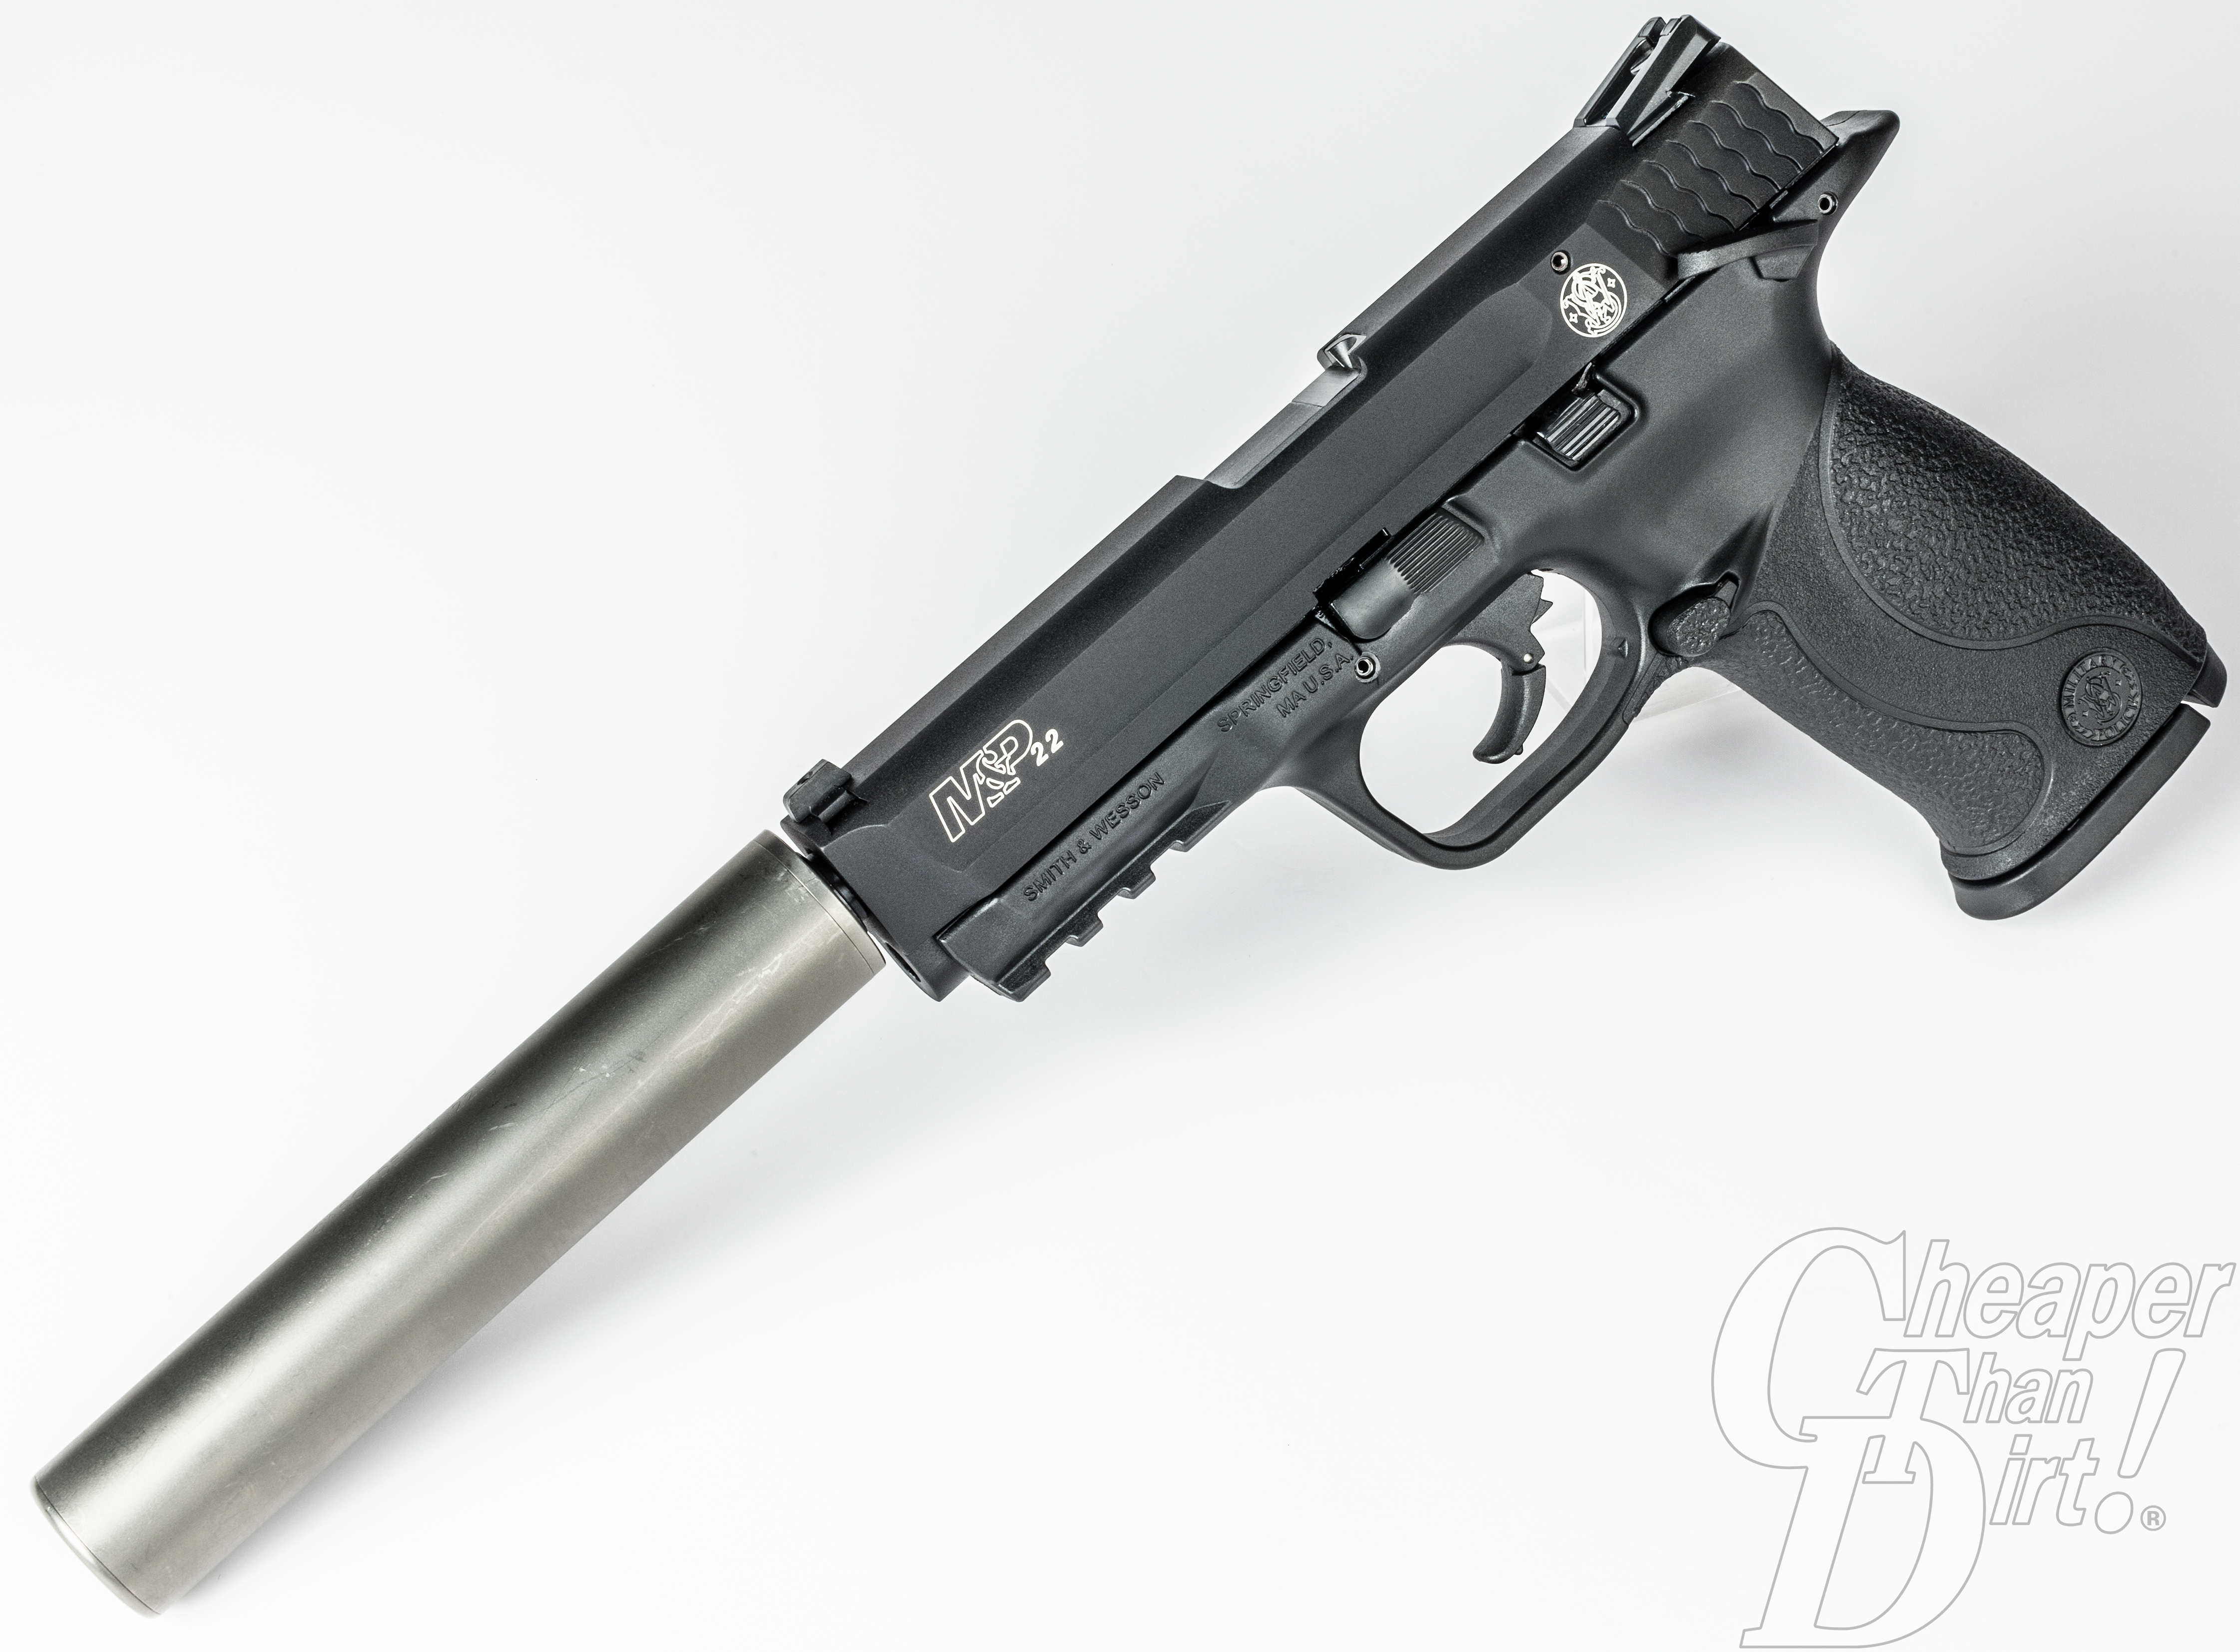 HQ Smith & Wesson Pistol Wallpapers | File 6396.06Kb